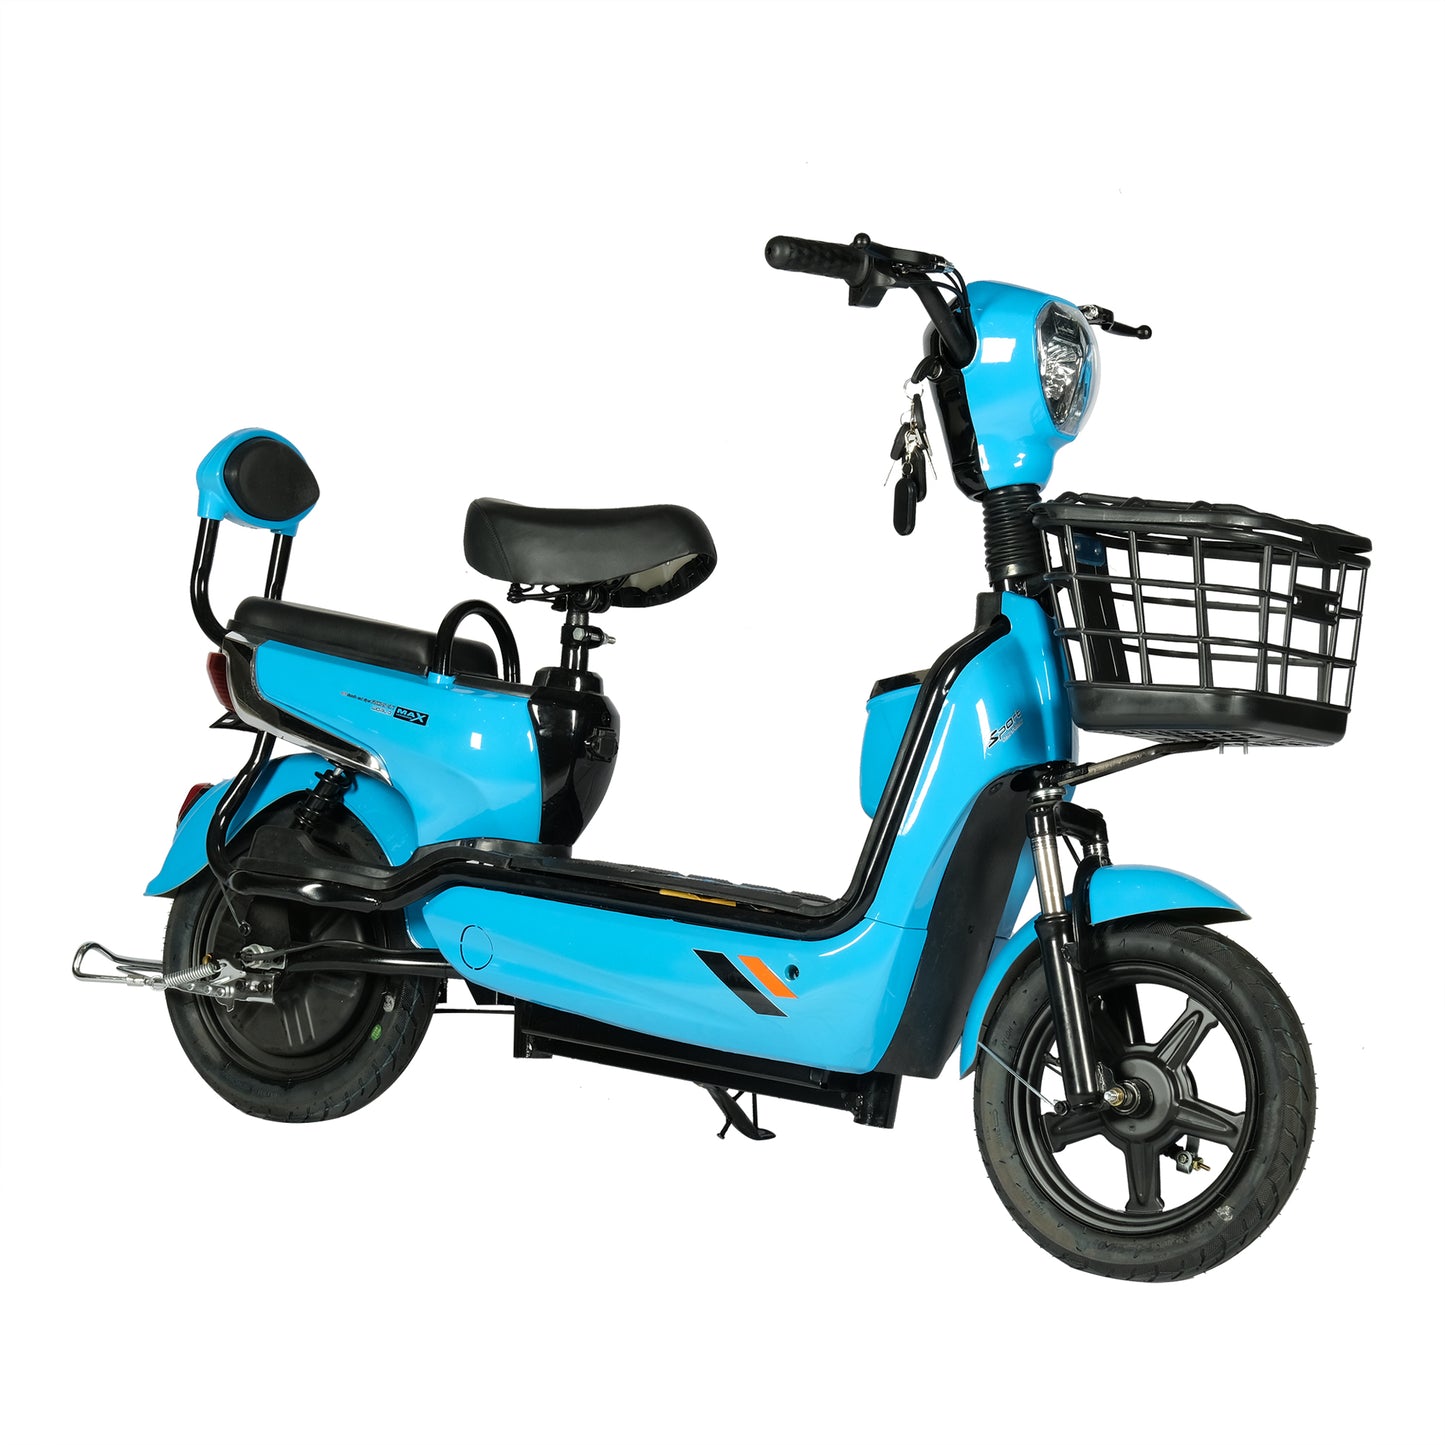 CRONY W3 motorcycle electric bike 350W 48V electric motorcycle Electric Bicycles